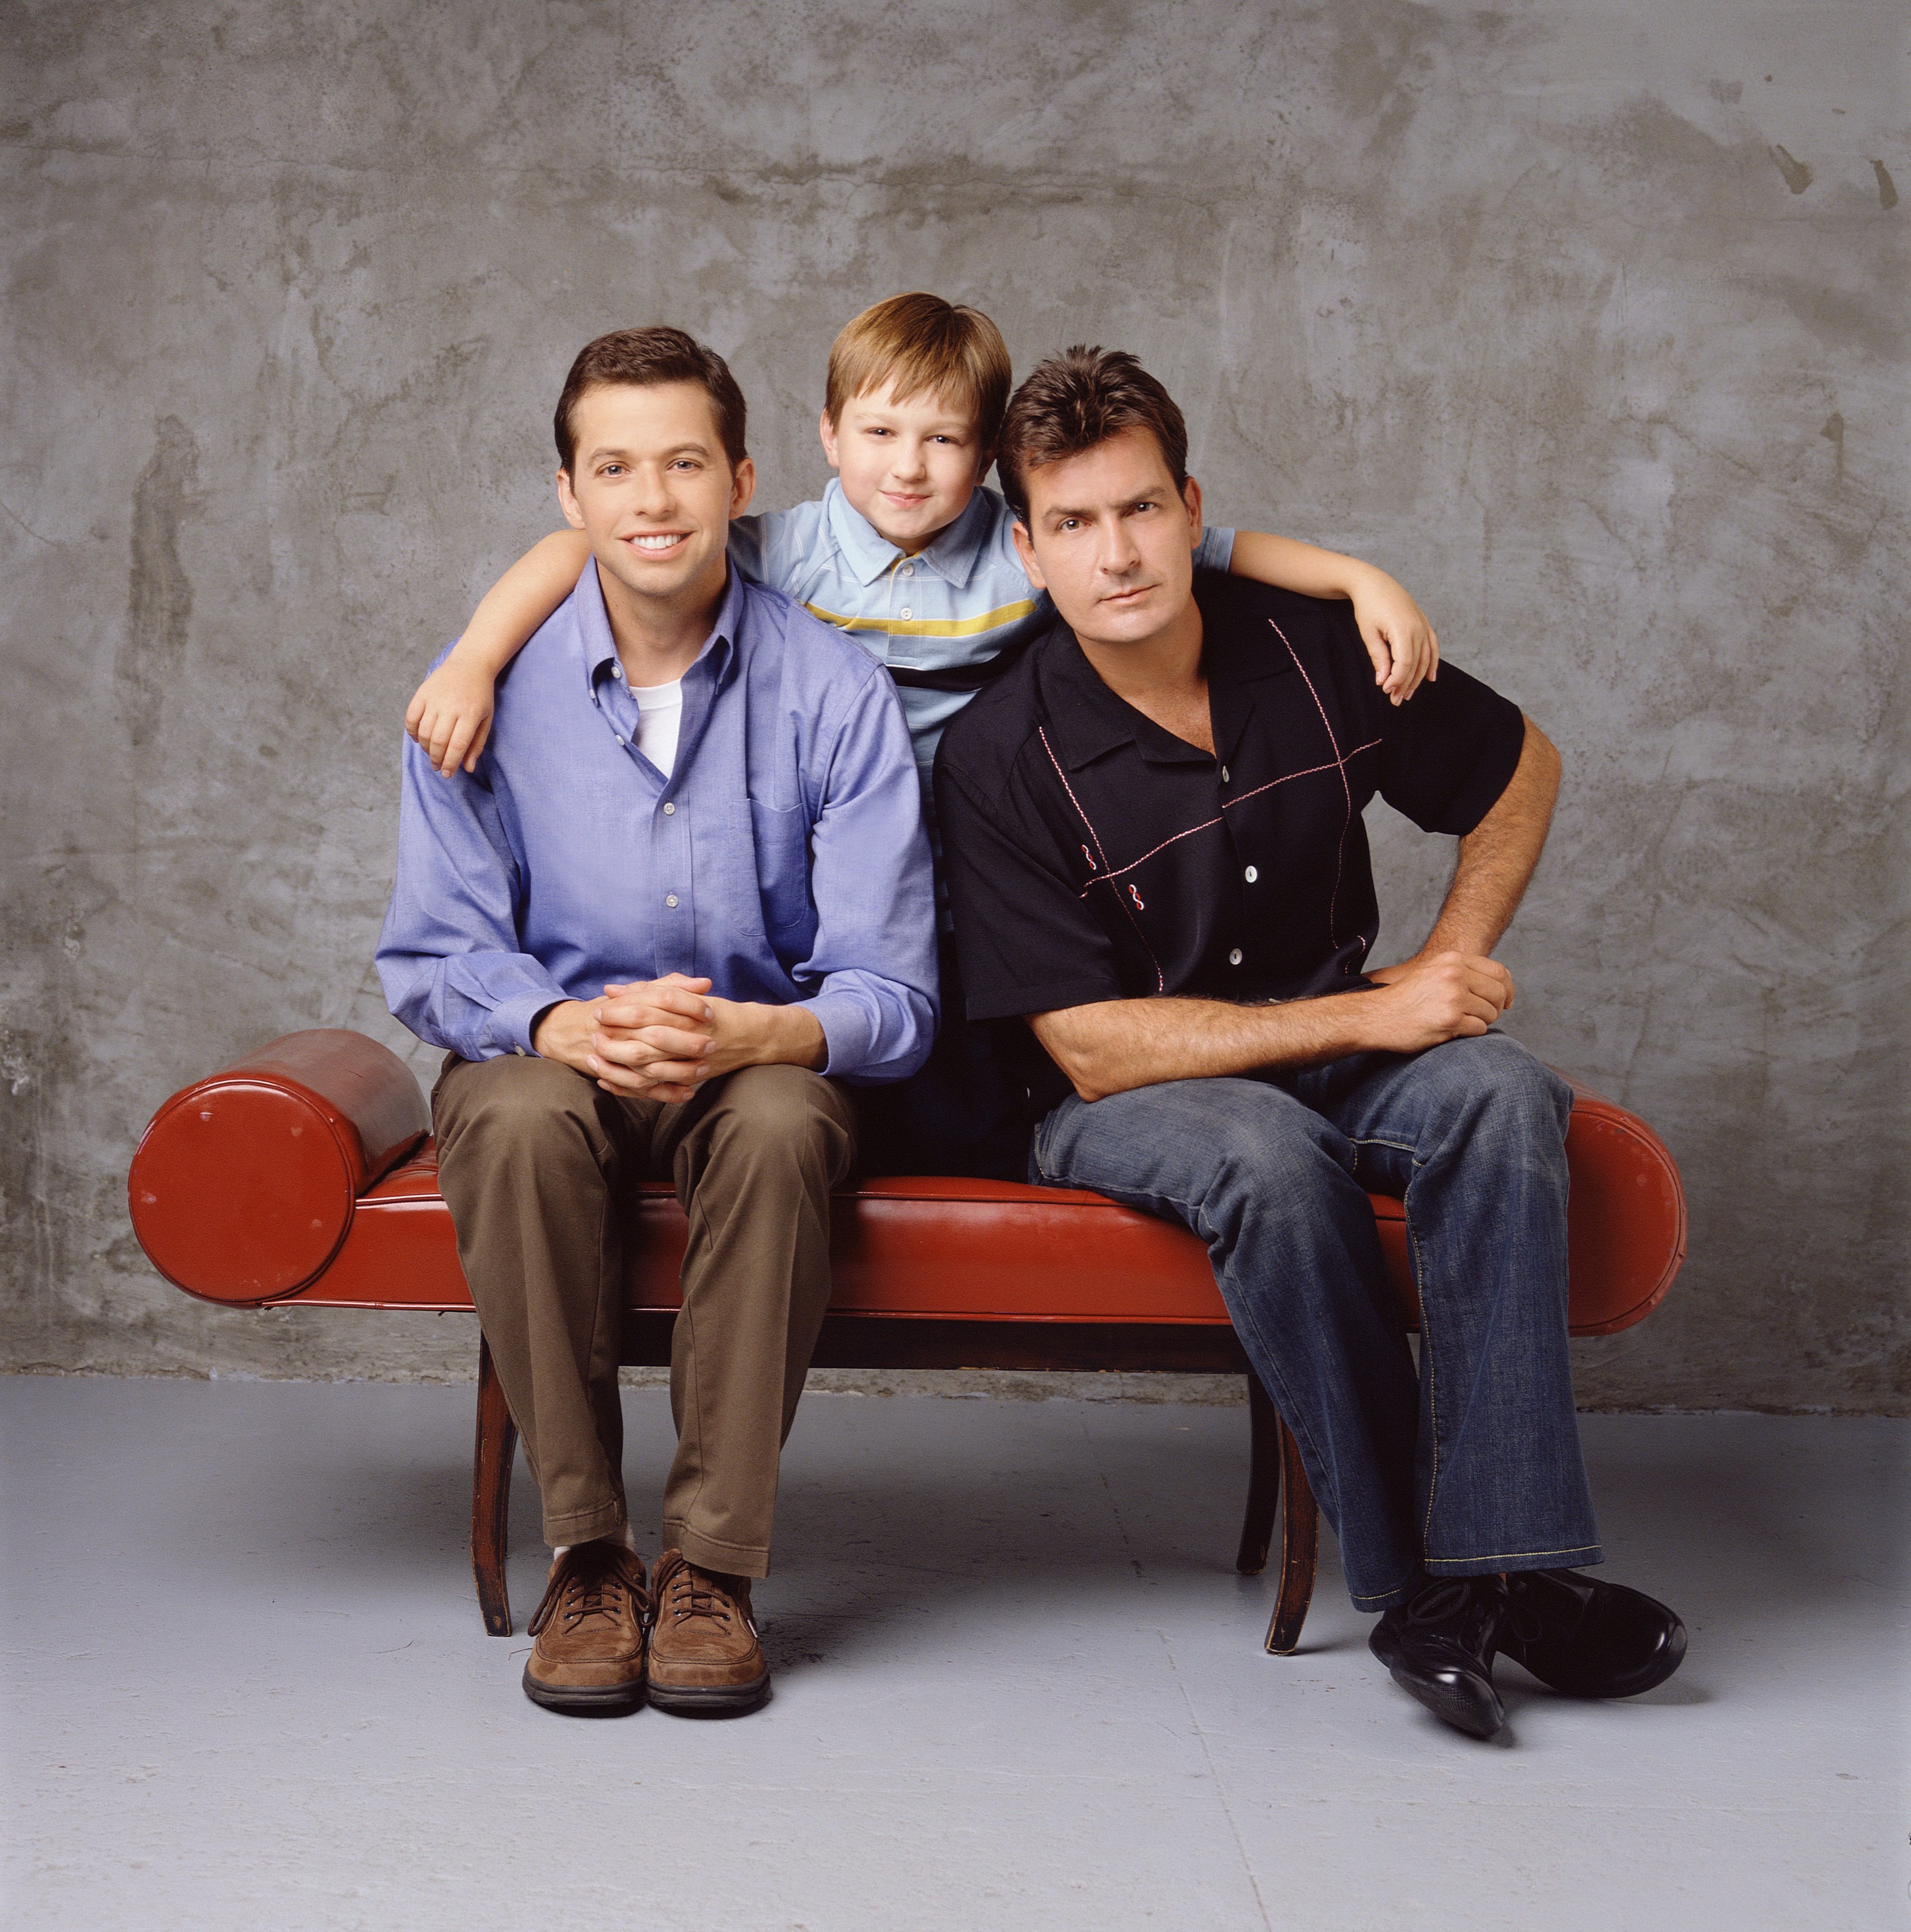 Promotional portrait of, from left, American actors Jon Cryer, Angus T. Jones, and Charlie Sheen for the television comedy 'Two and a Half Men,' Los Angeles, California, 2003. | Source: Getty Images